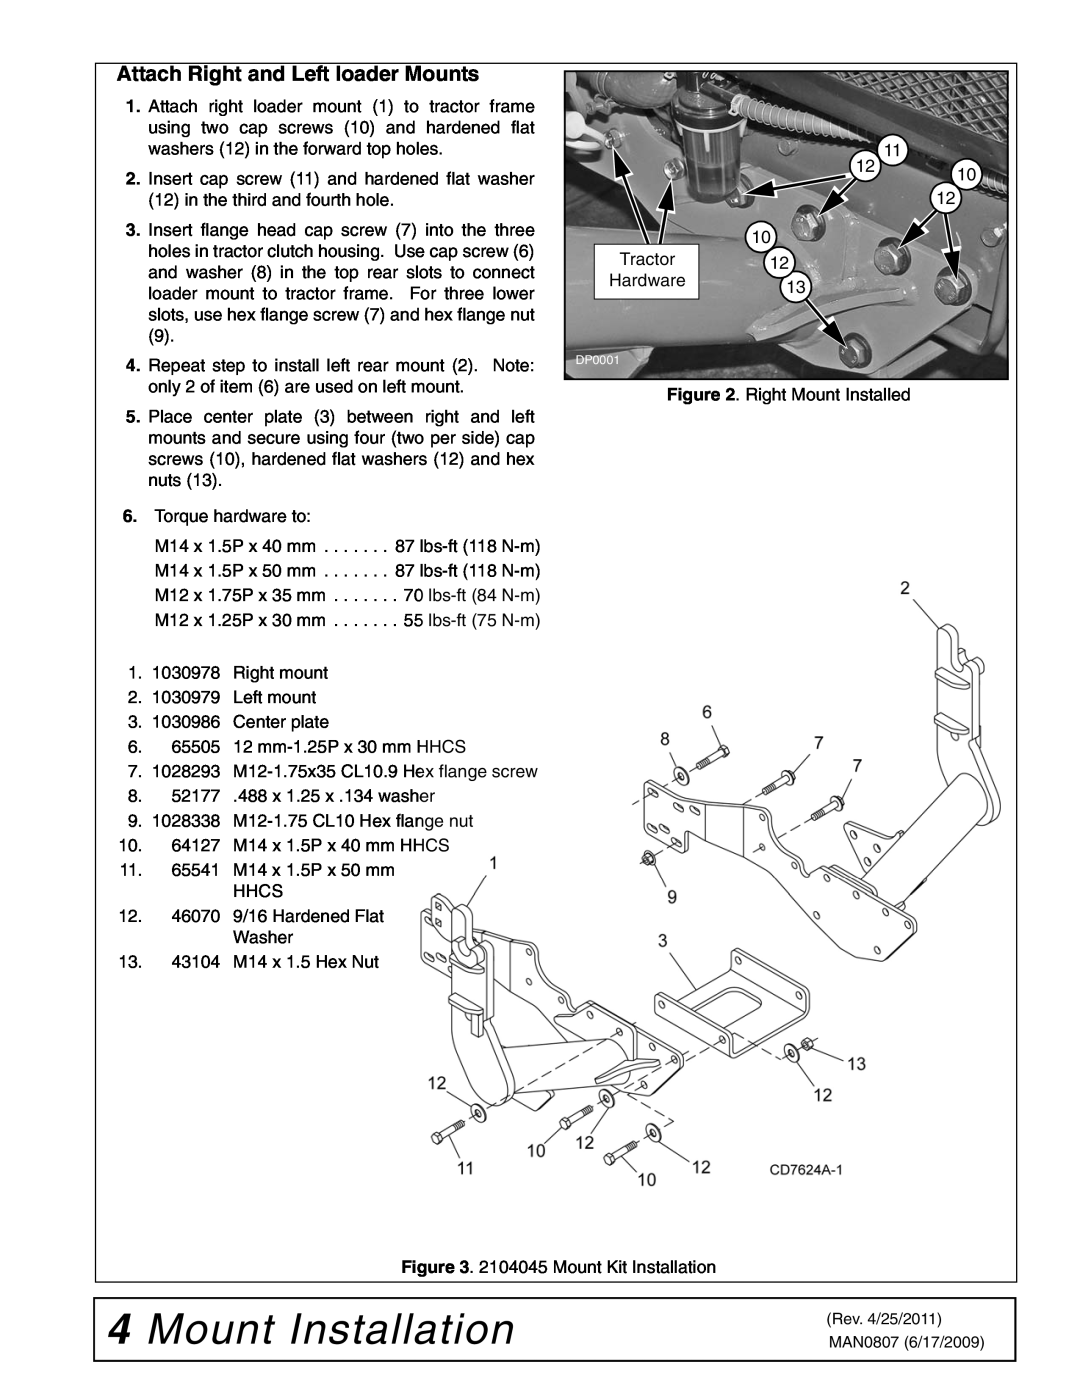 Woods Equipment 2104045 installation manual Mount Installation, Attach Right and Left loader Mounts 